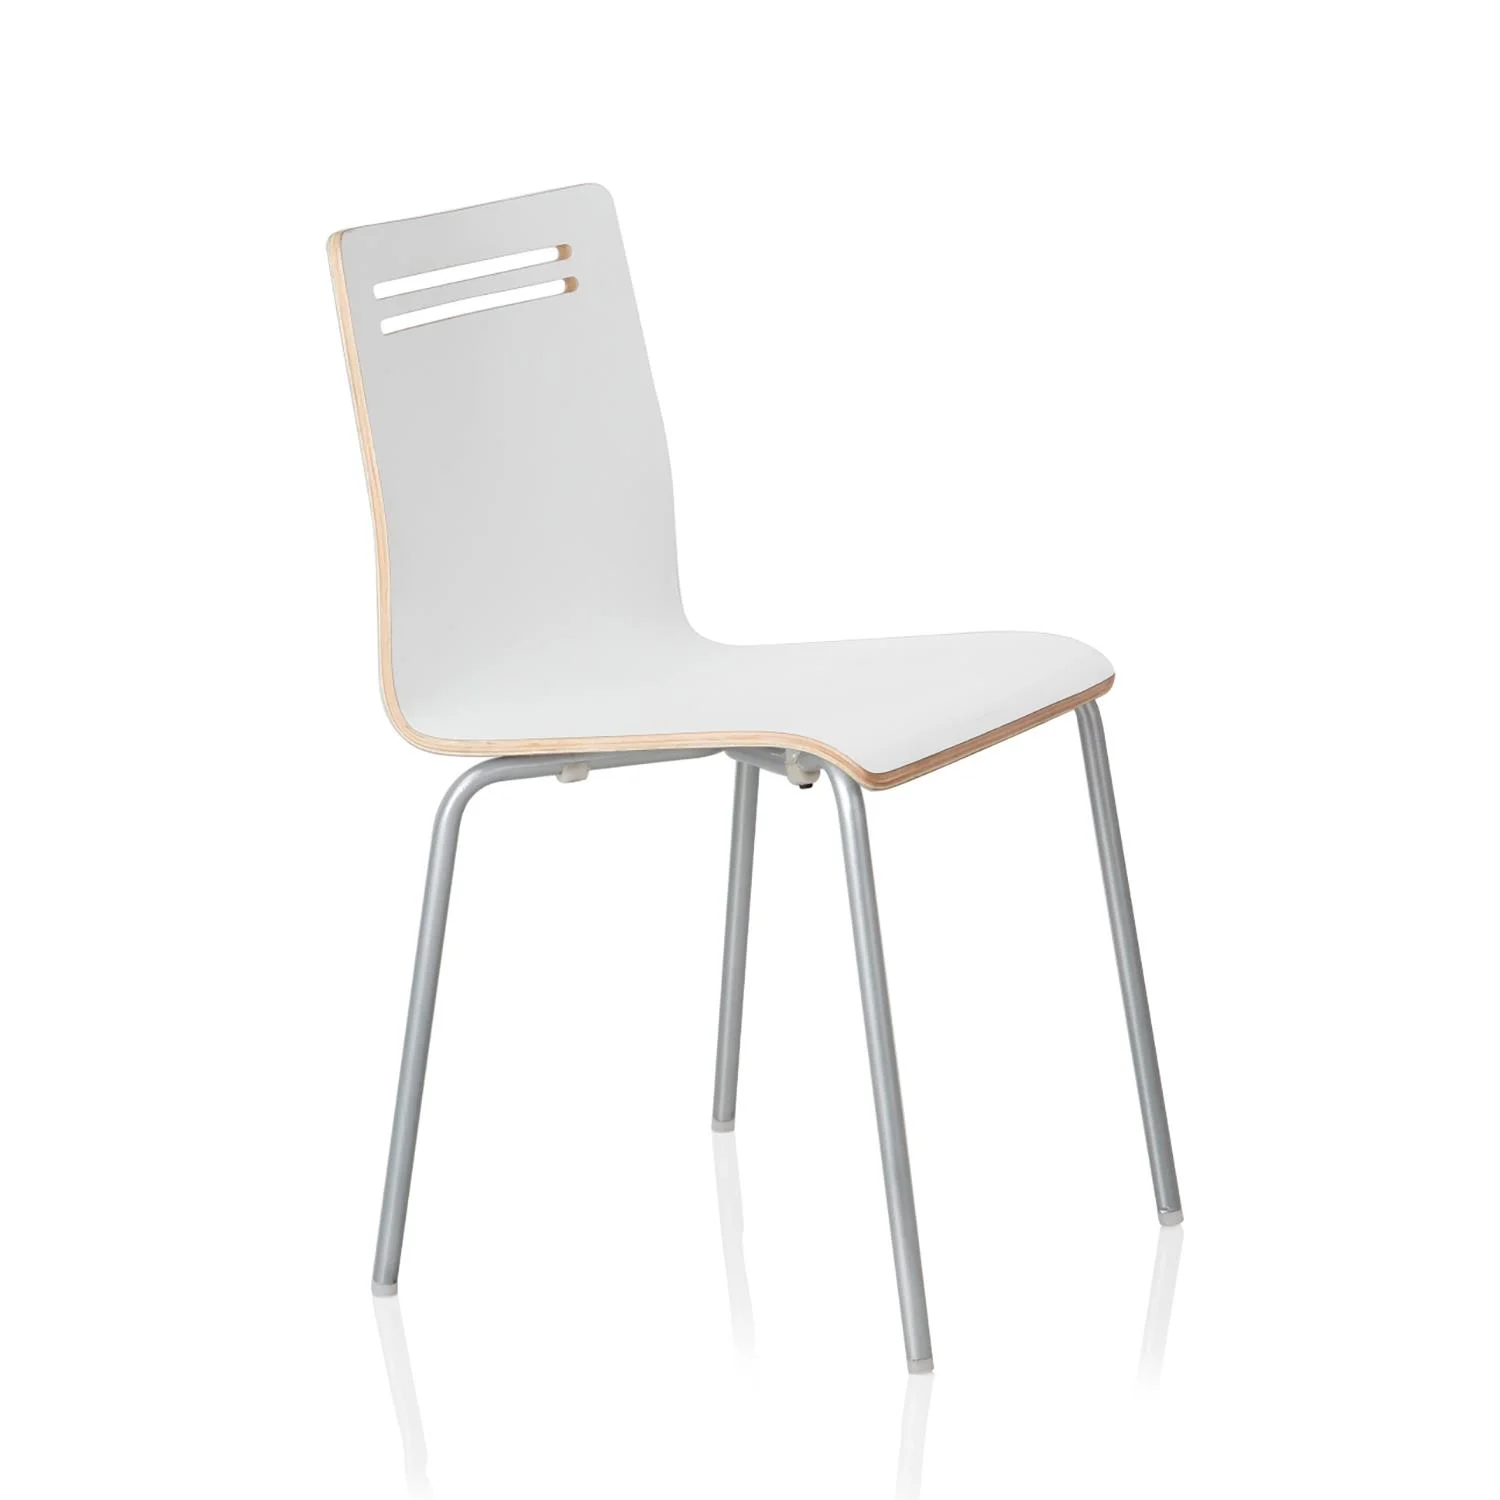 Zella Cafe Chair